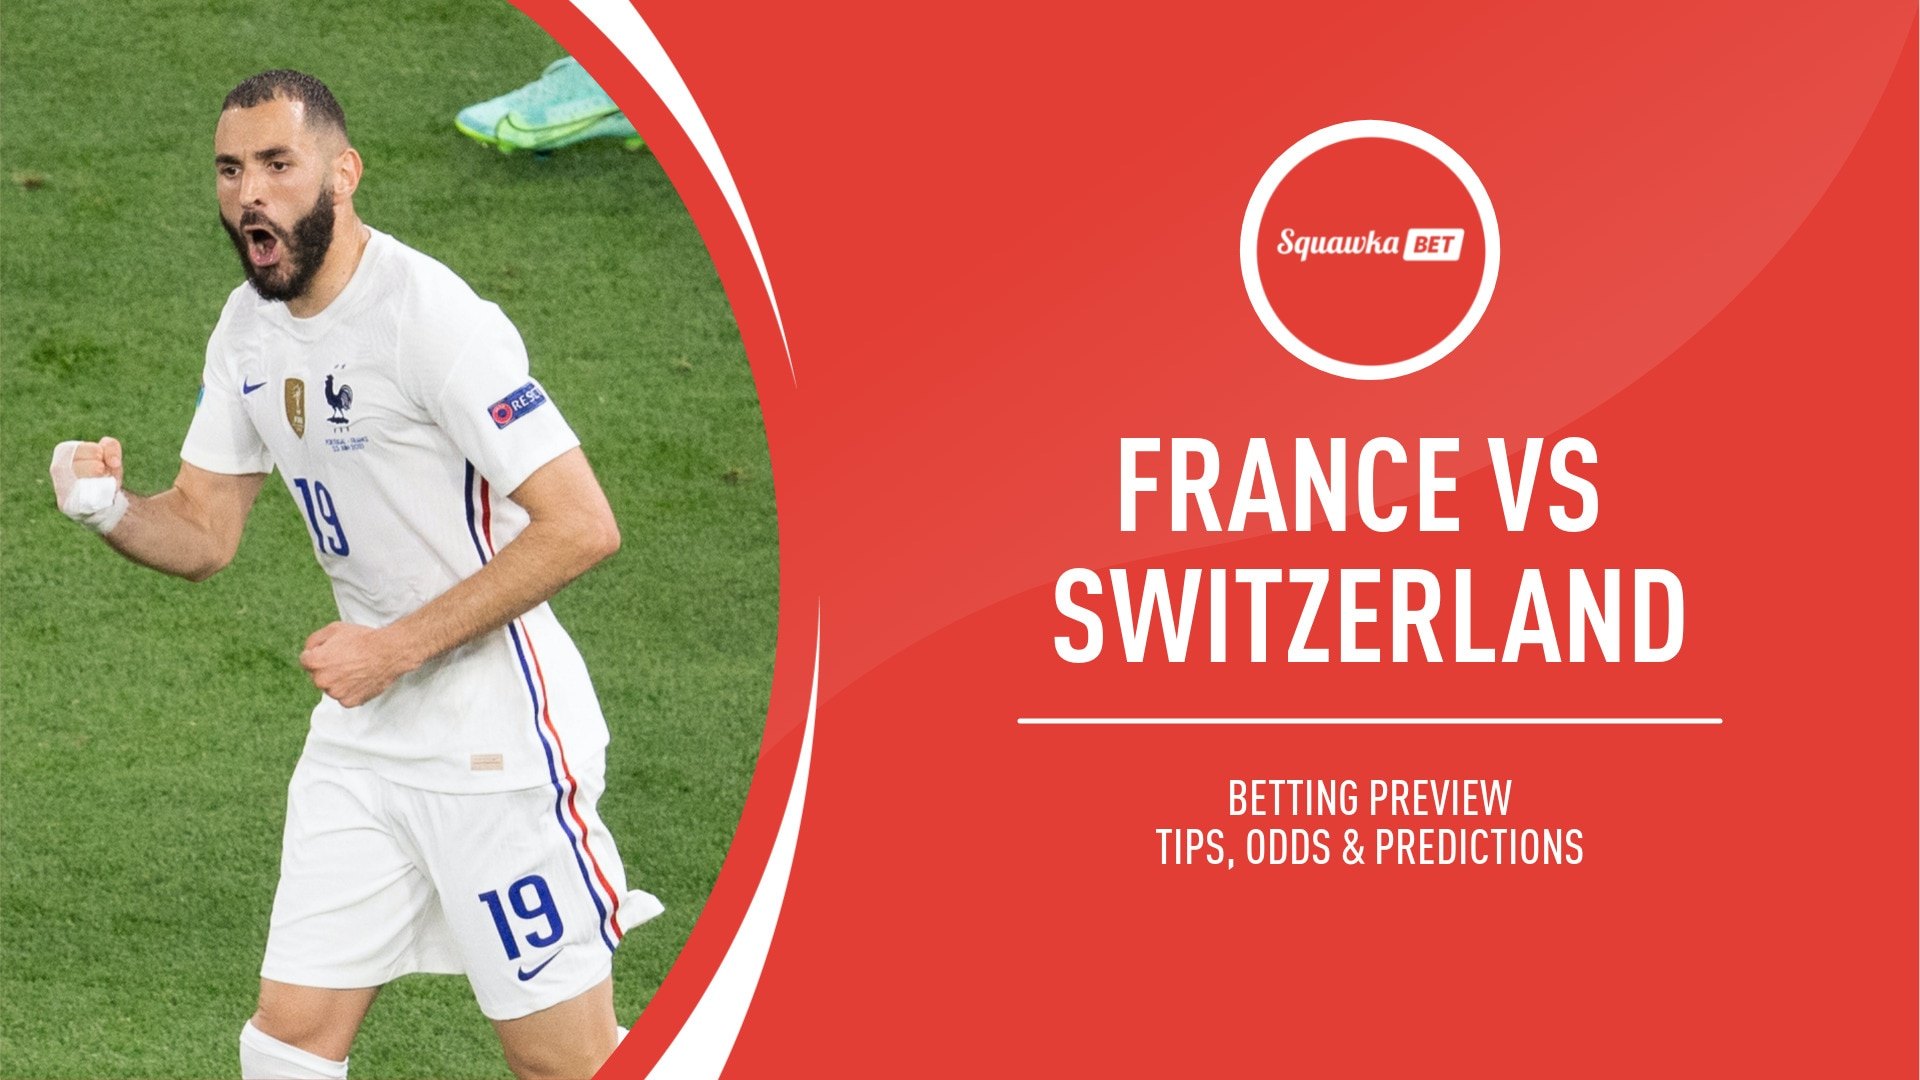 PREVIEW France vs Switzerland: Predictions, Team News, Betting Tips and Odds